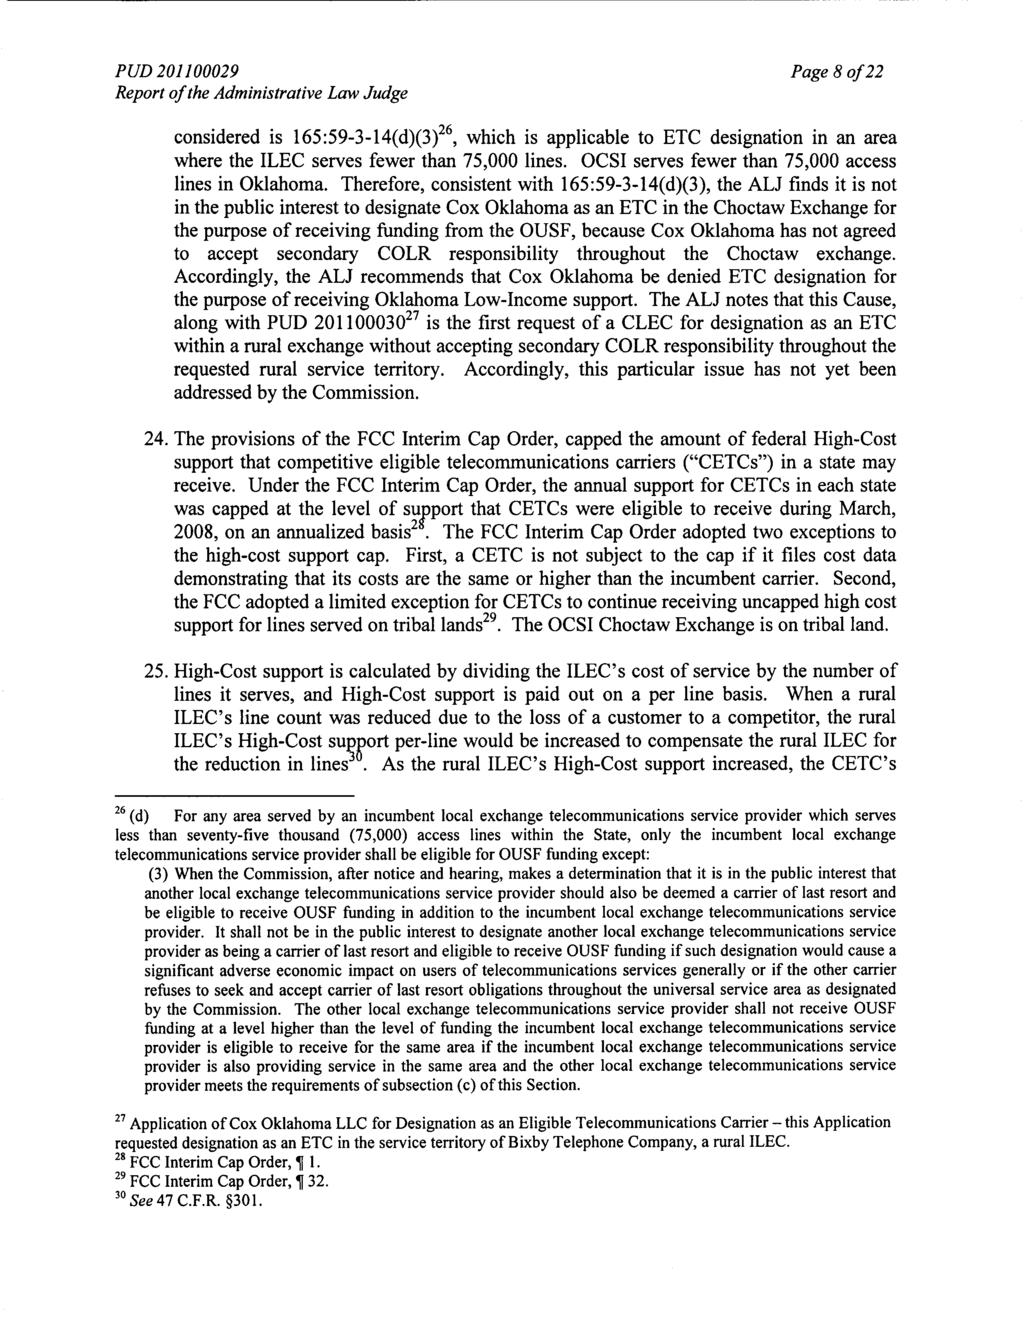 PUD 201100029 Page 8 of 22 considered is 165:59-3-14(d)(3) 26, which is applicable to ETC designation in an area where the ILEC serves fewer than 75,000 lines.